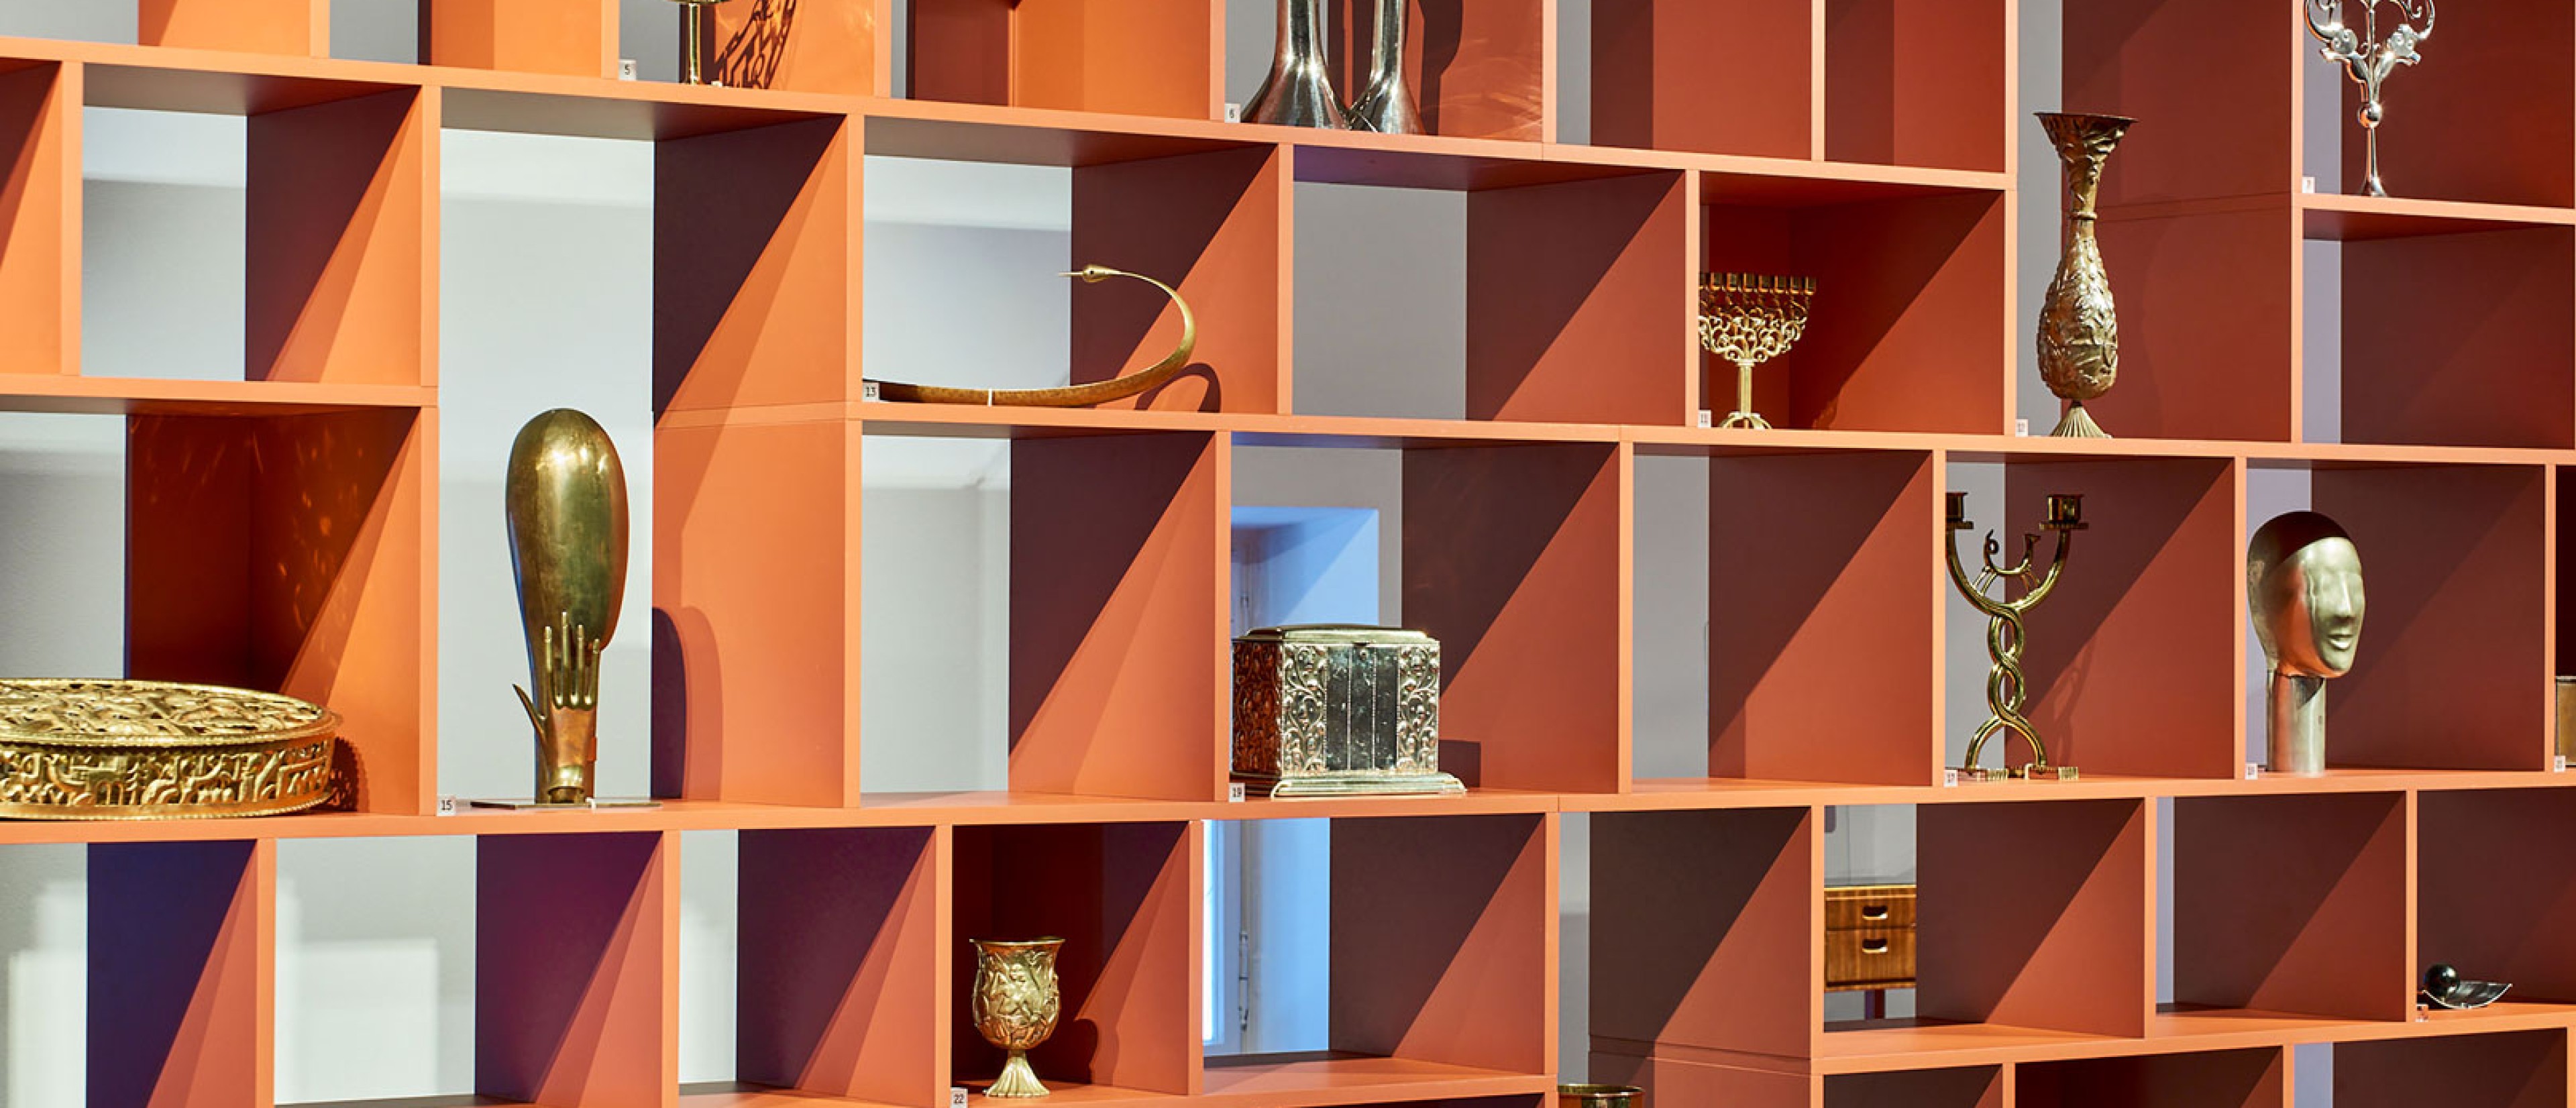 A shelf in oragne stands in the middle of a room and is filled with objects.